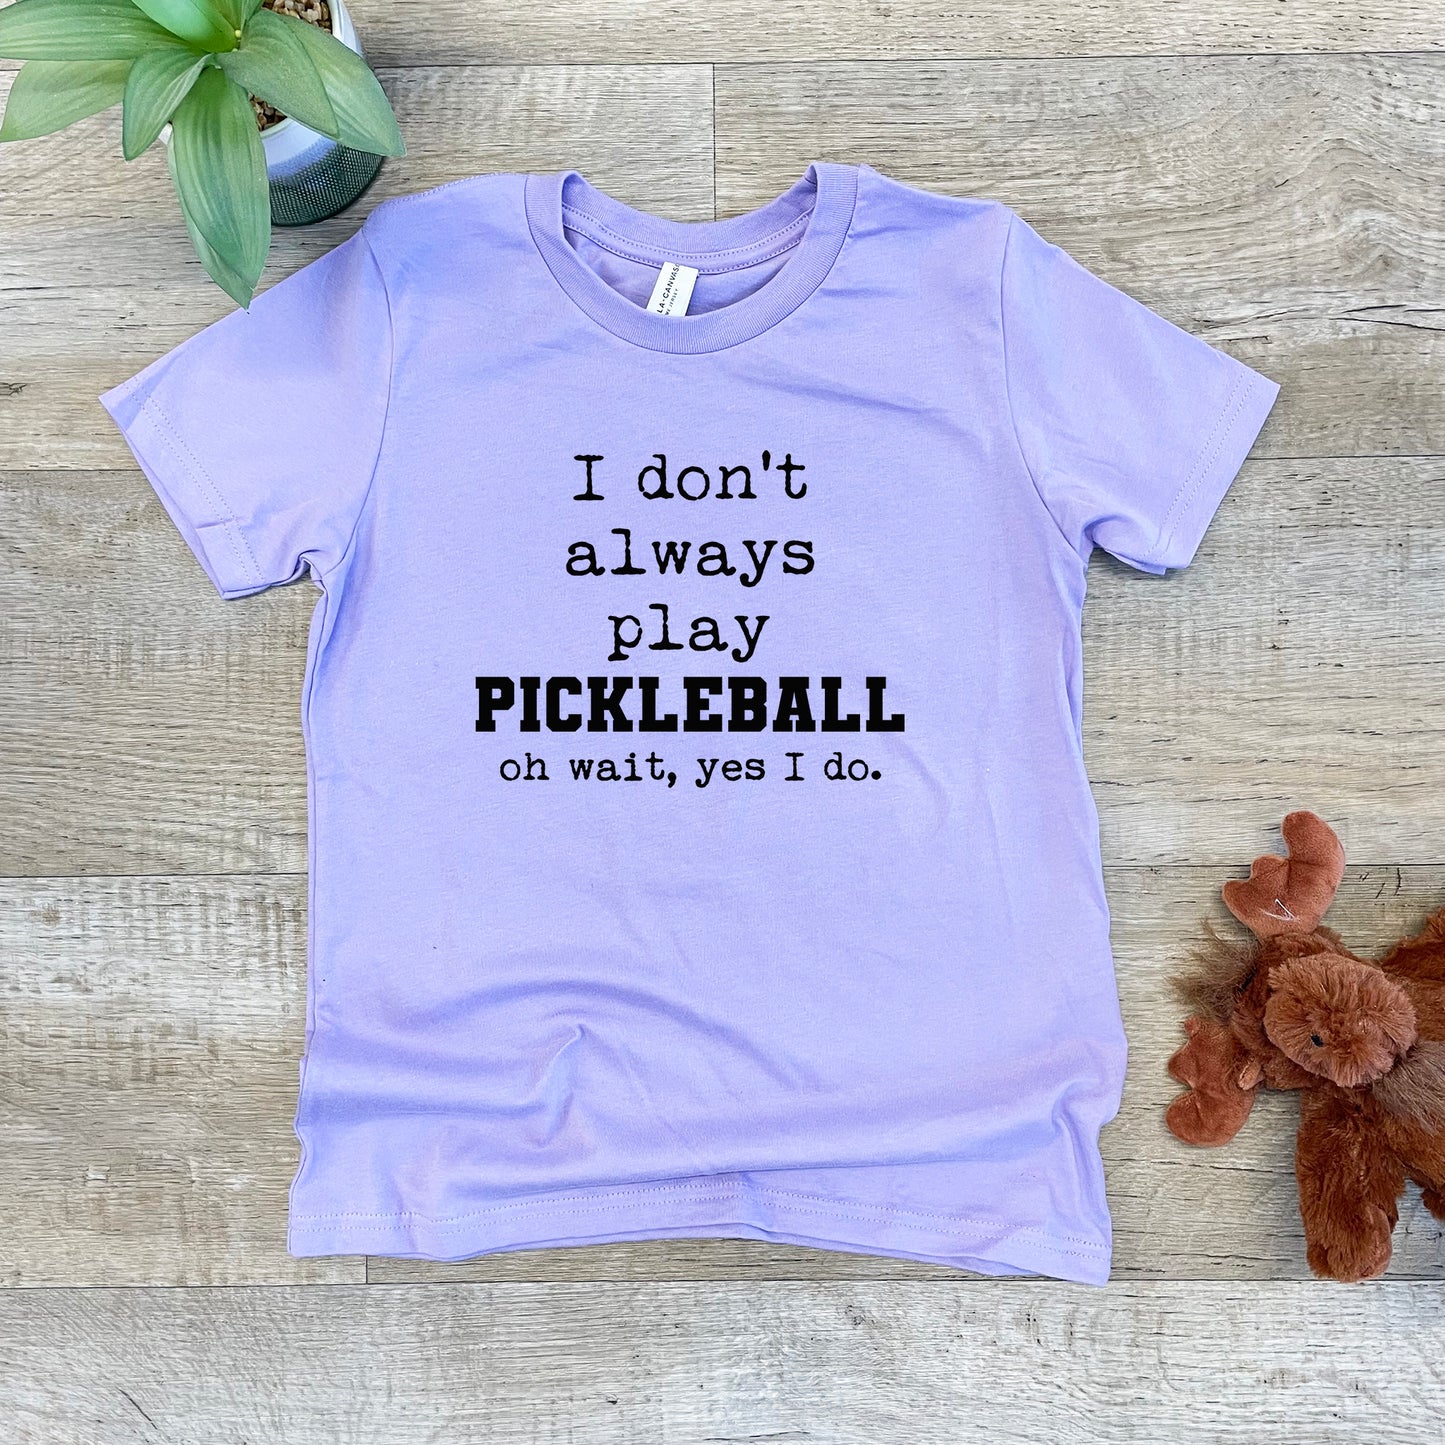 I Don't Always Play Pickleball (Oh Wait, Yes I Do) - Kid's Tee - Columbia Blue or Lavender